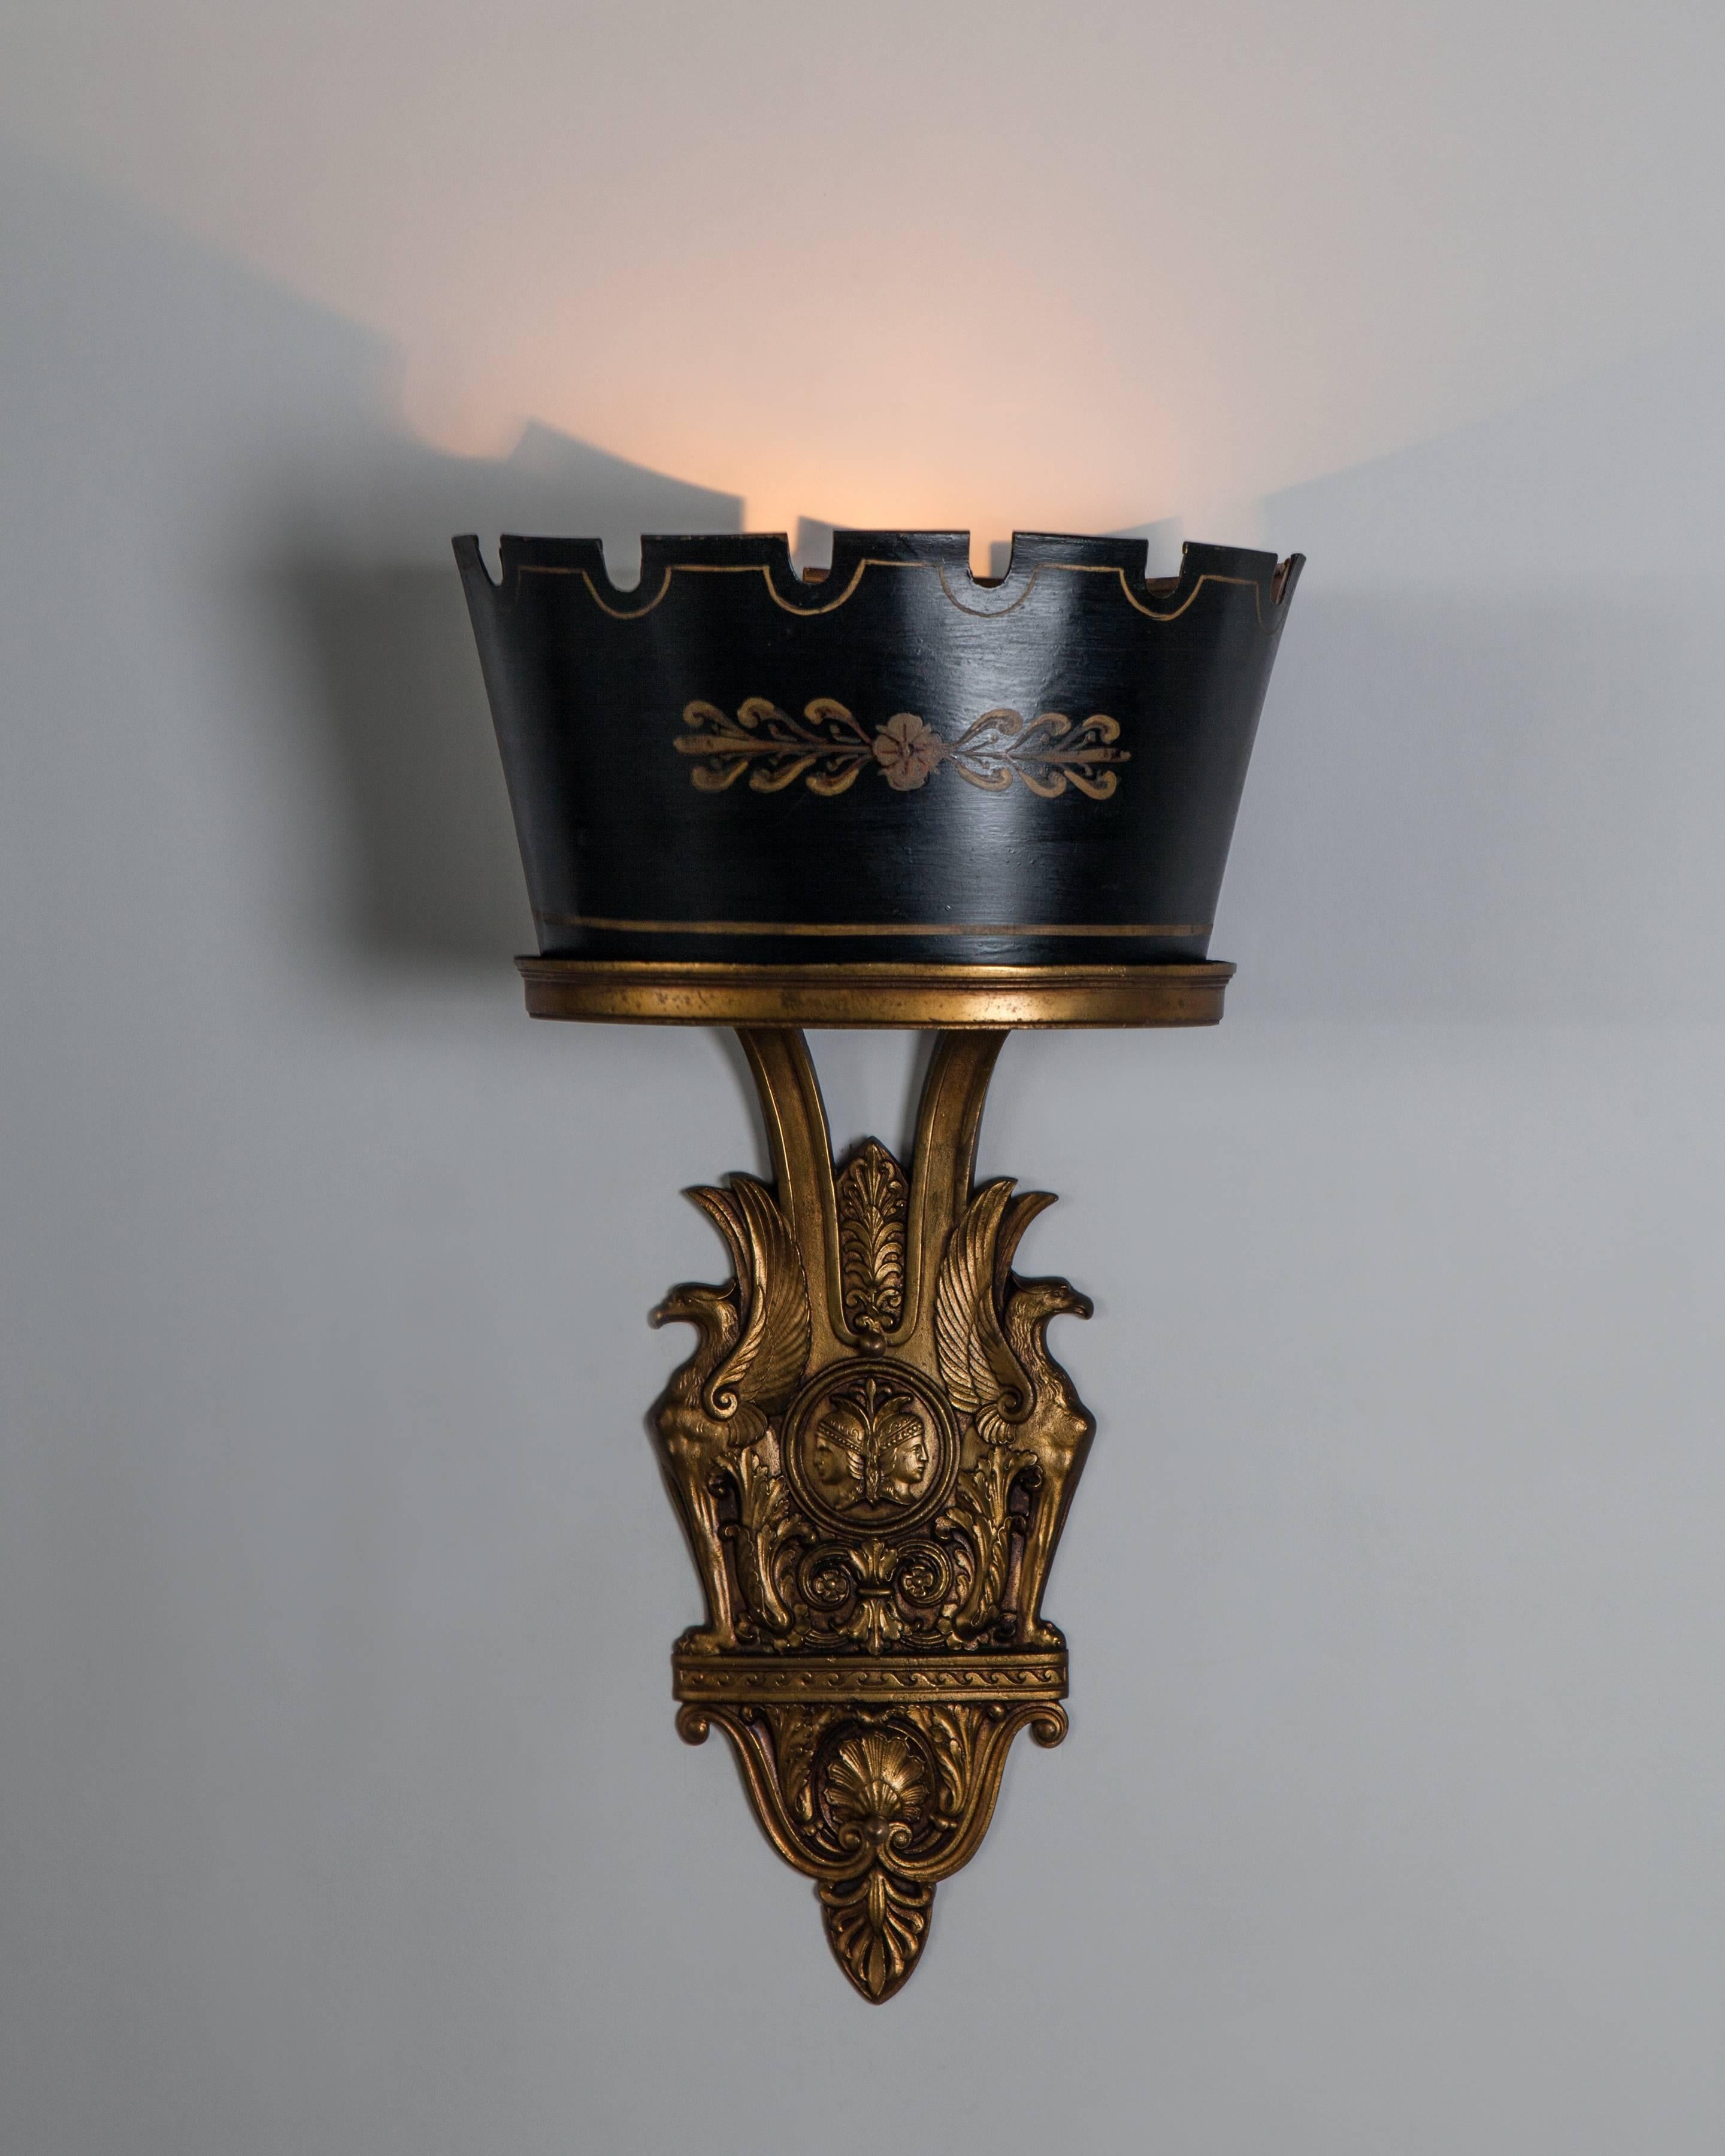 AIS3012
A pair of aged brass Empire wall sconces with toleware shades in their original hand-painted finish. Signed by the New York maker Sterling Bronze Co.